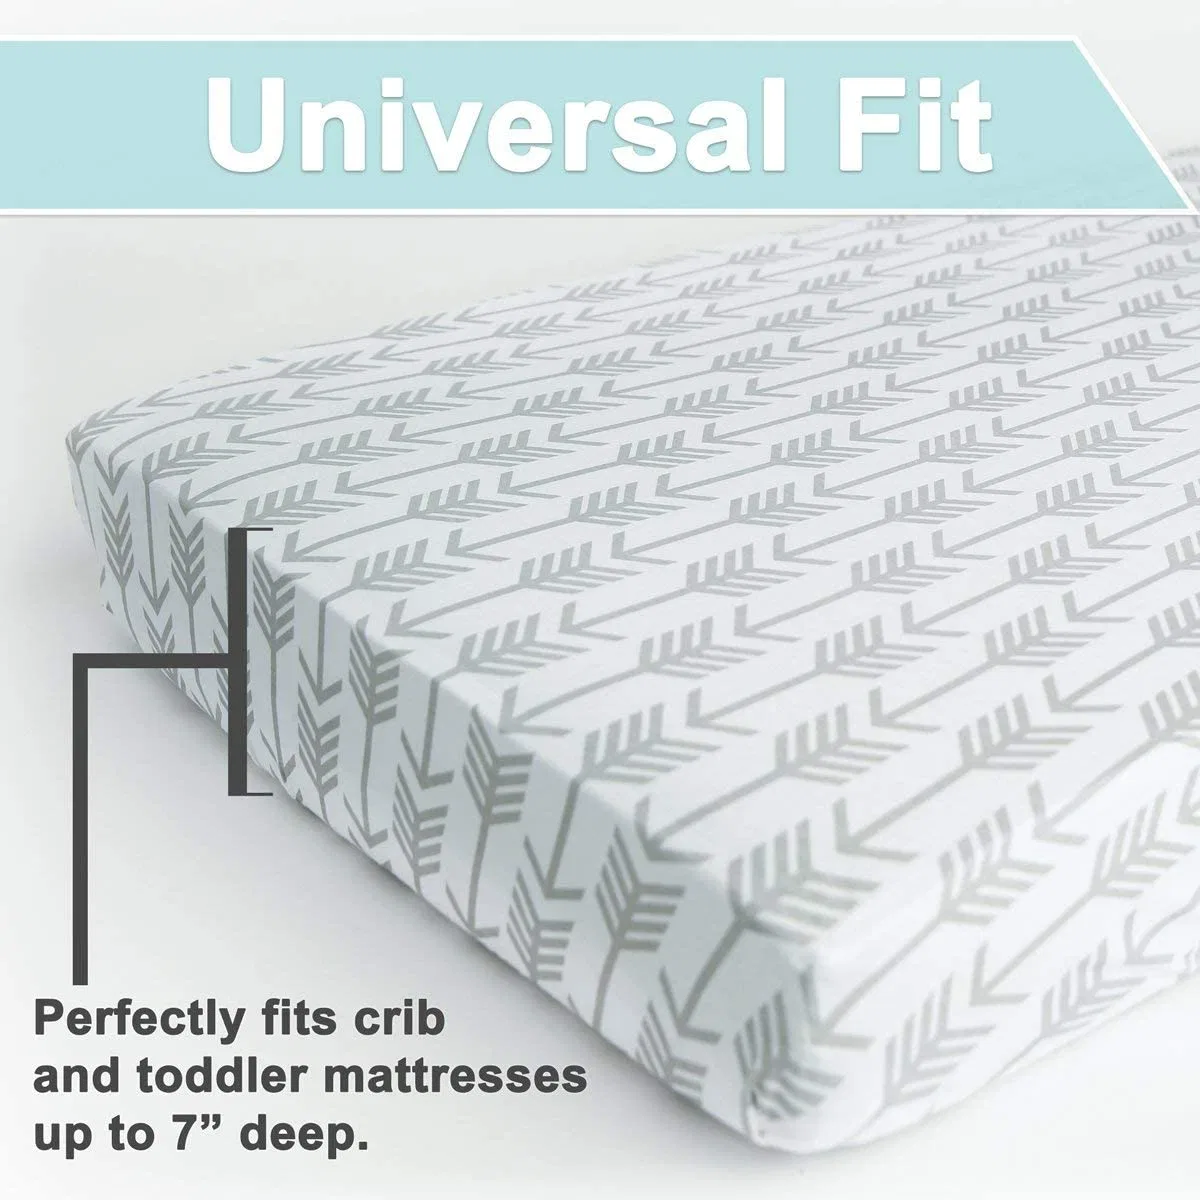 Fitted Cotton Crib Cover Flexible Universal Fit Baby Cradle Sheets